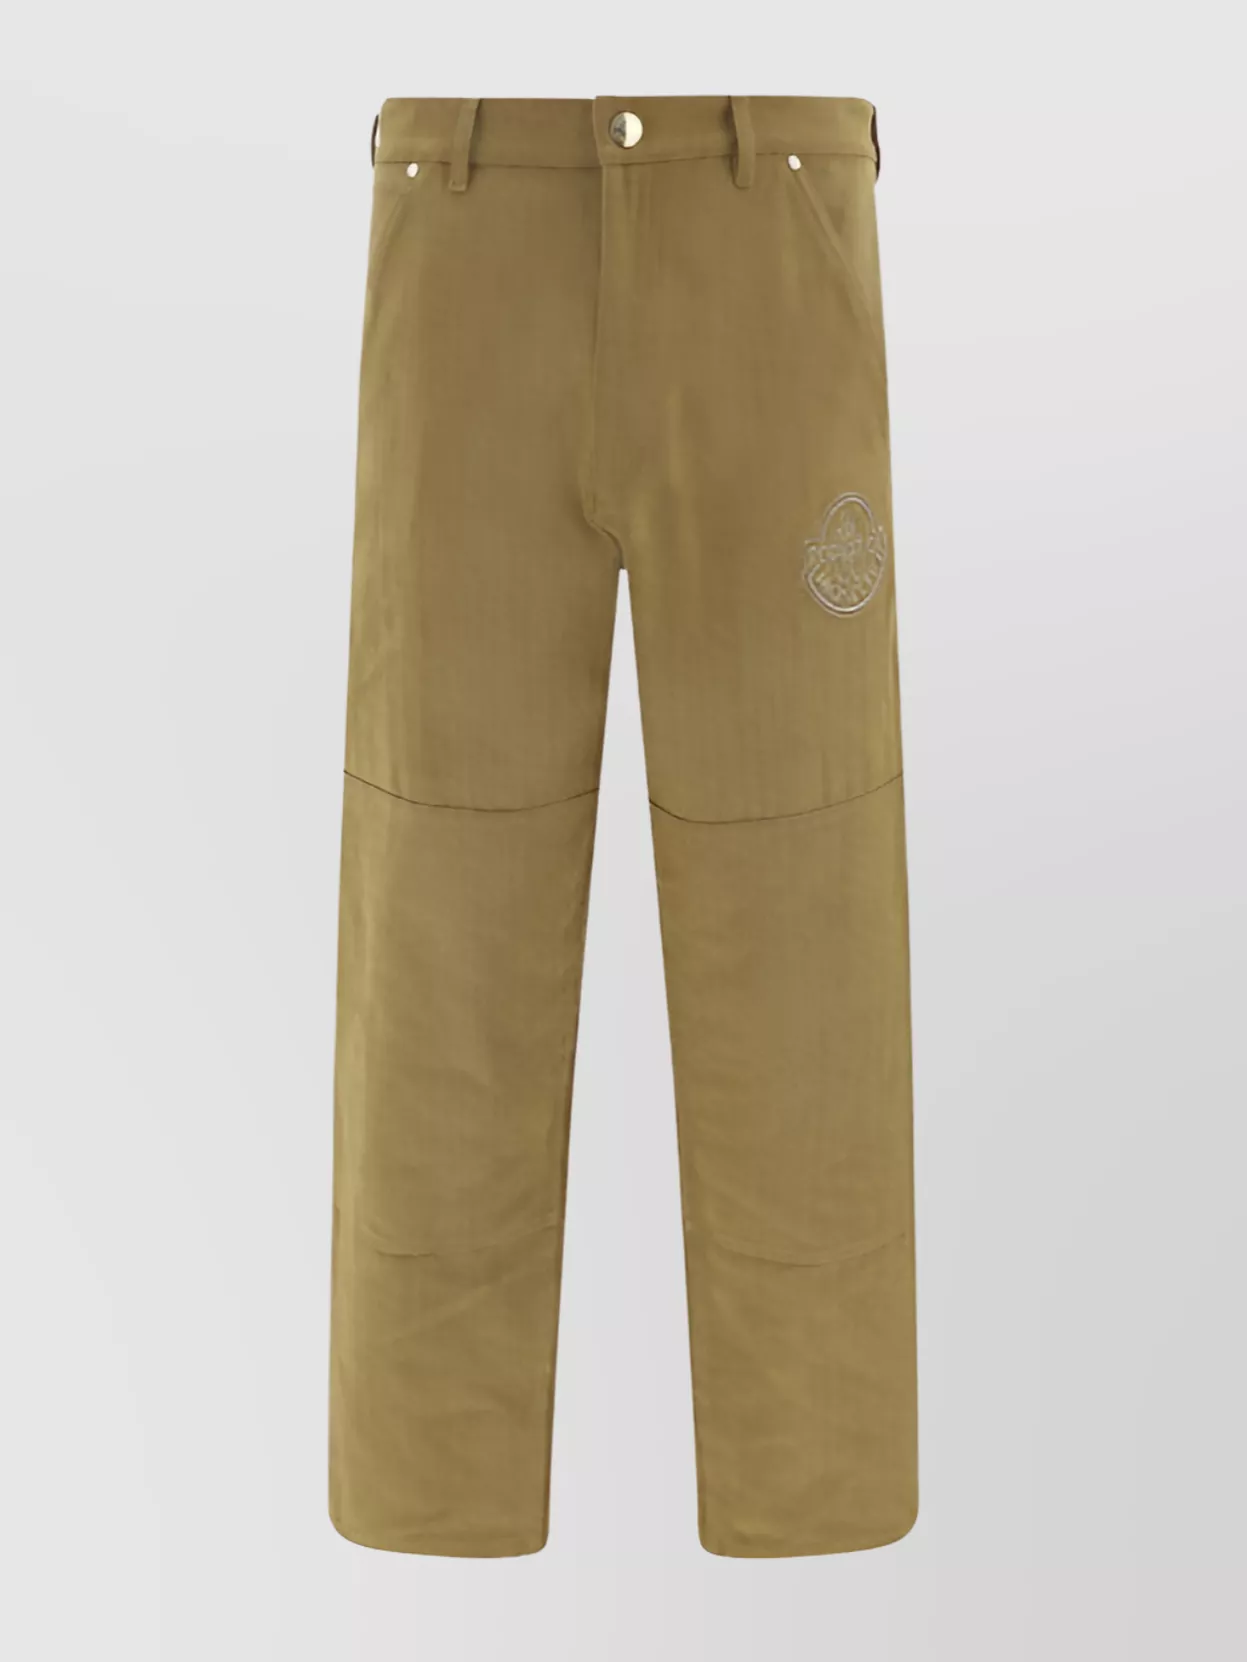 Moncler Genius Jay-z X Moncler Trousers In Brown